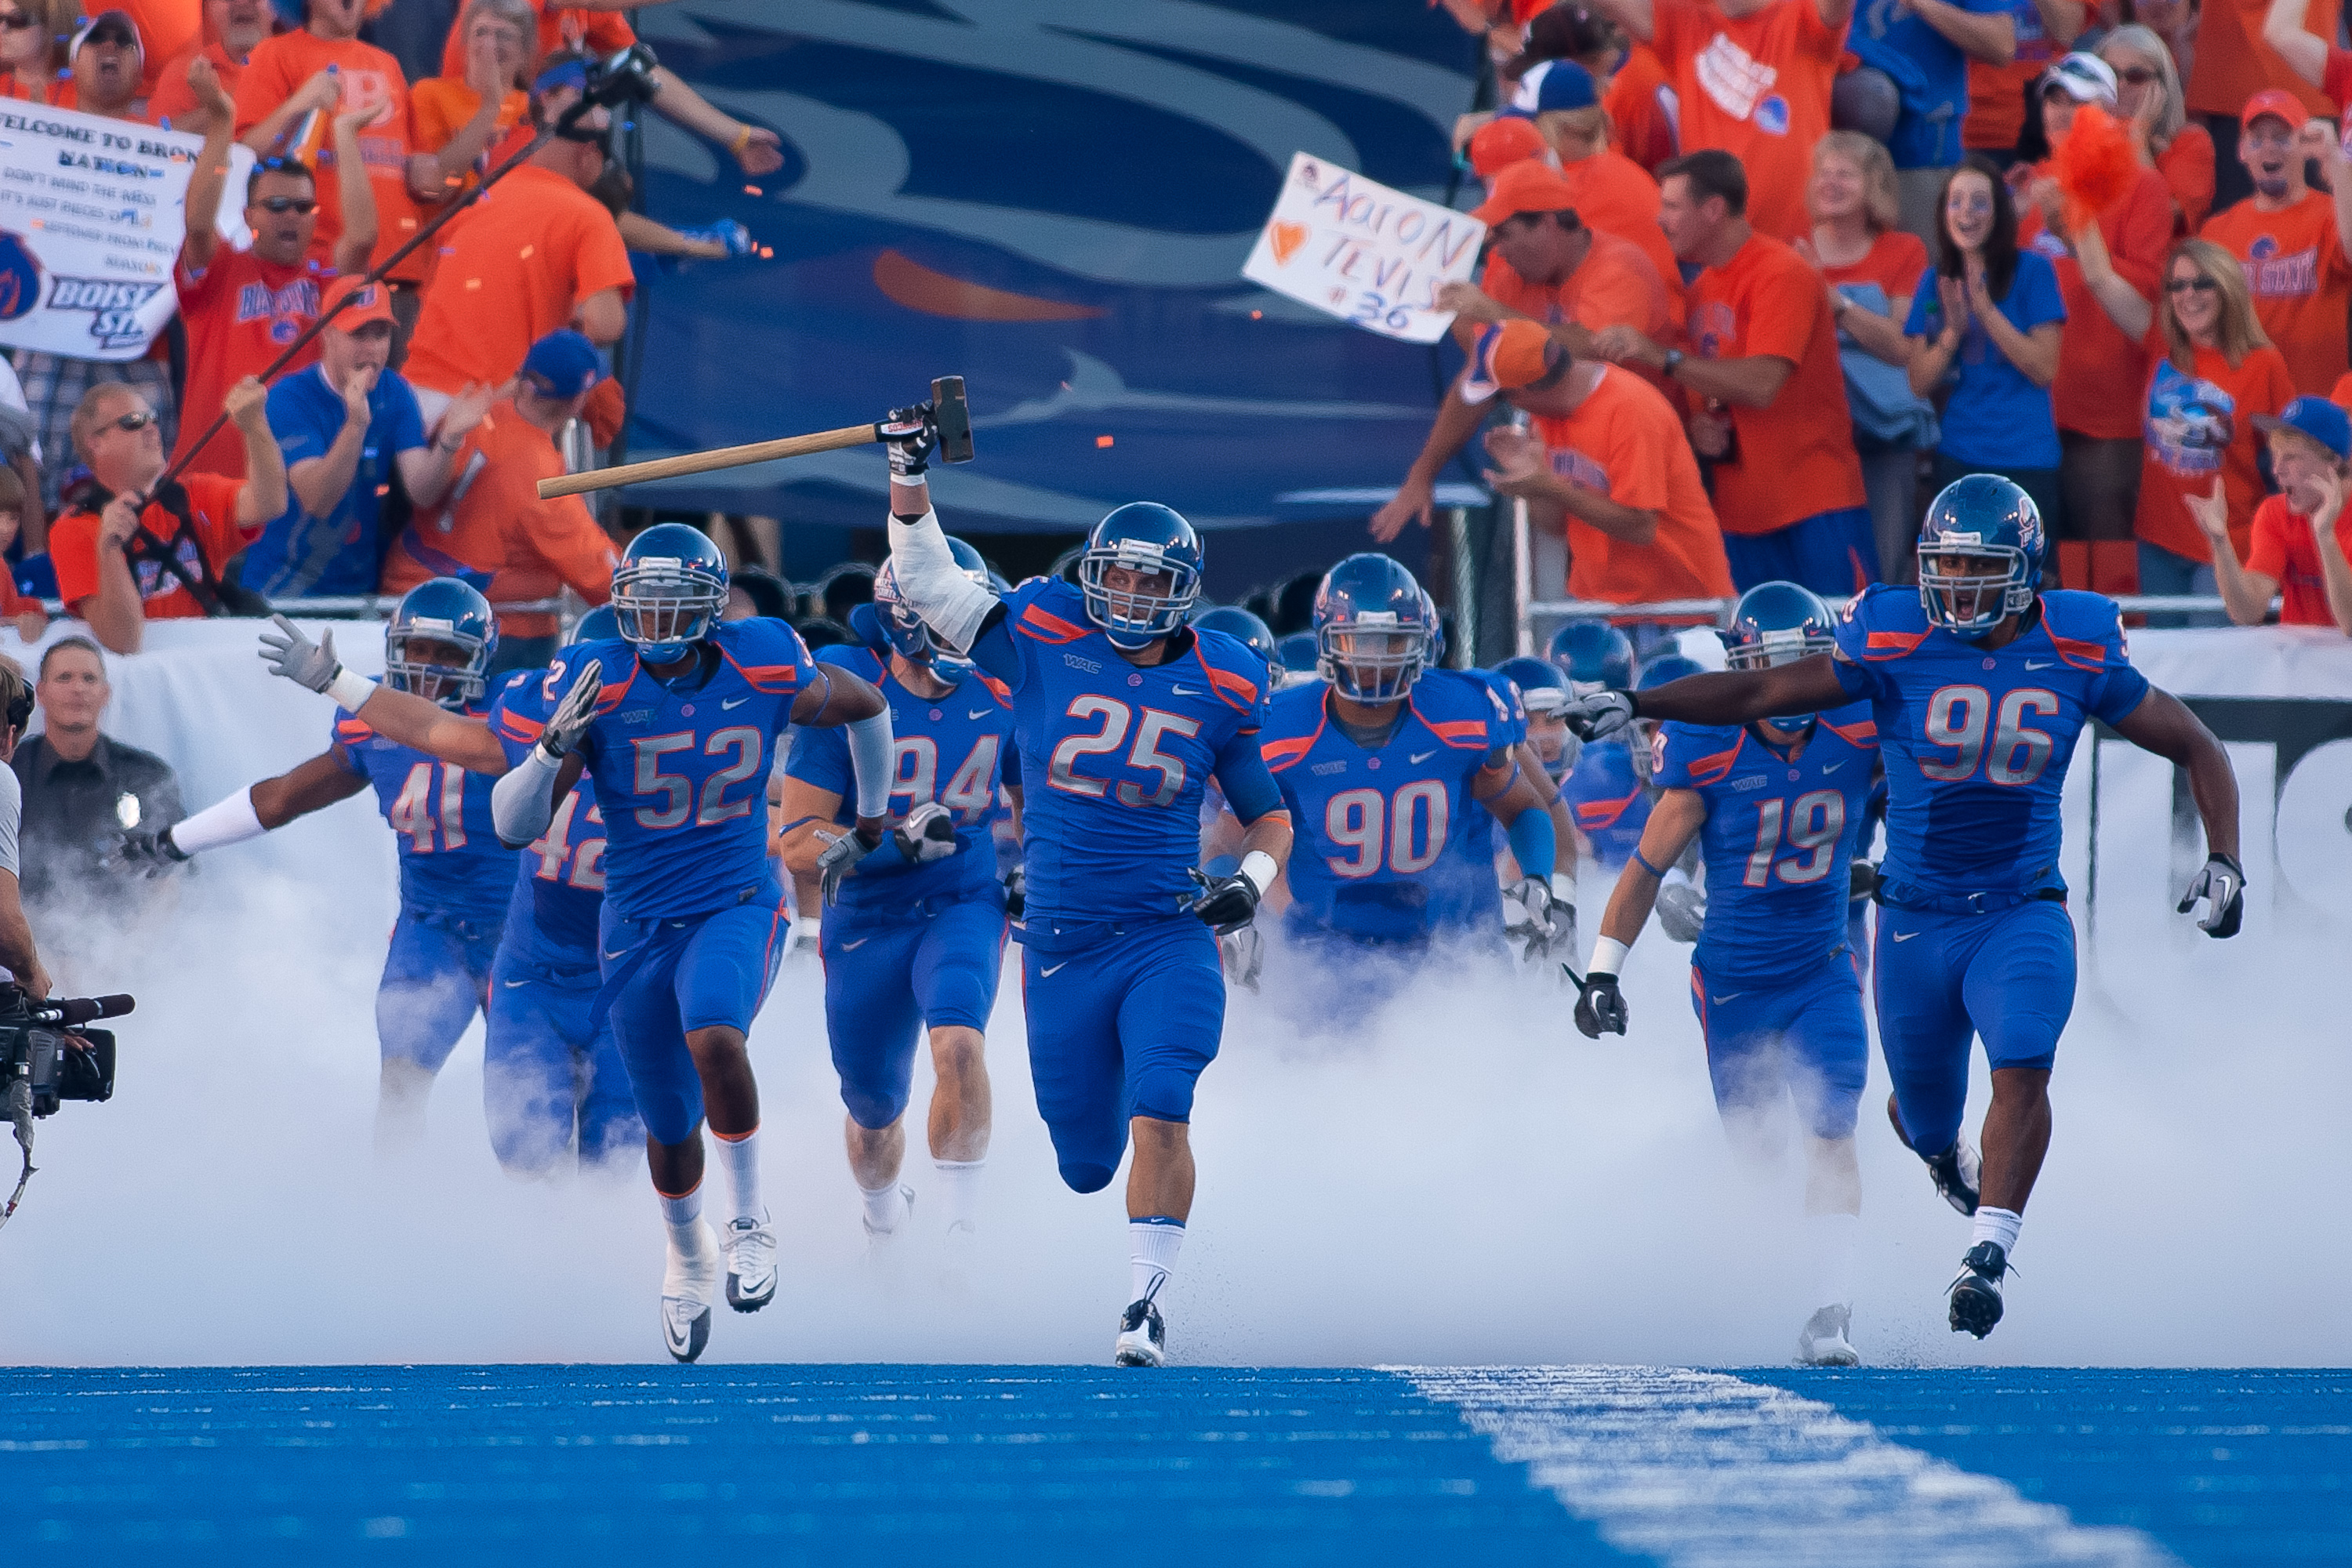 BOISE, ID - SEPTEMBER 25:  Linebacker Billy Derome #25 of the Boise State Broncos leads his team onto the field before the game against the Oregon State Beavers at Bronco Stadium on September 25, 2010 in Boise, Idaho.  (Photo by Otto Kitsinger III/Getty I